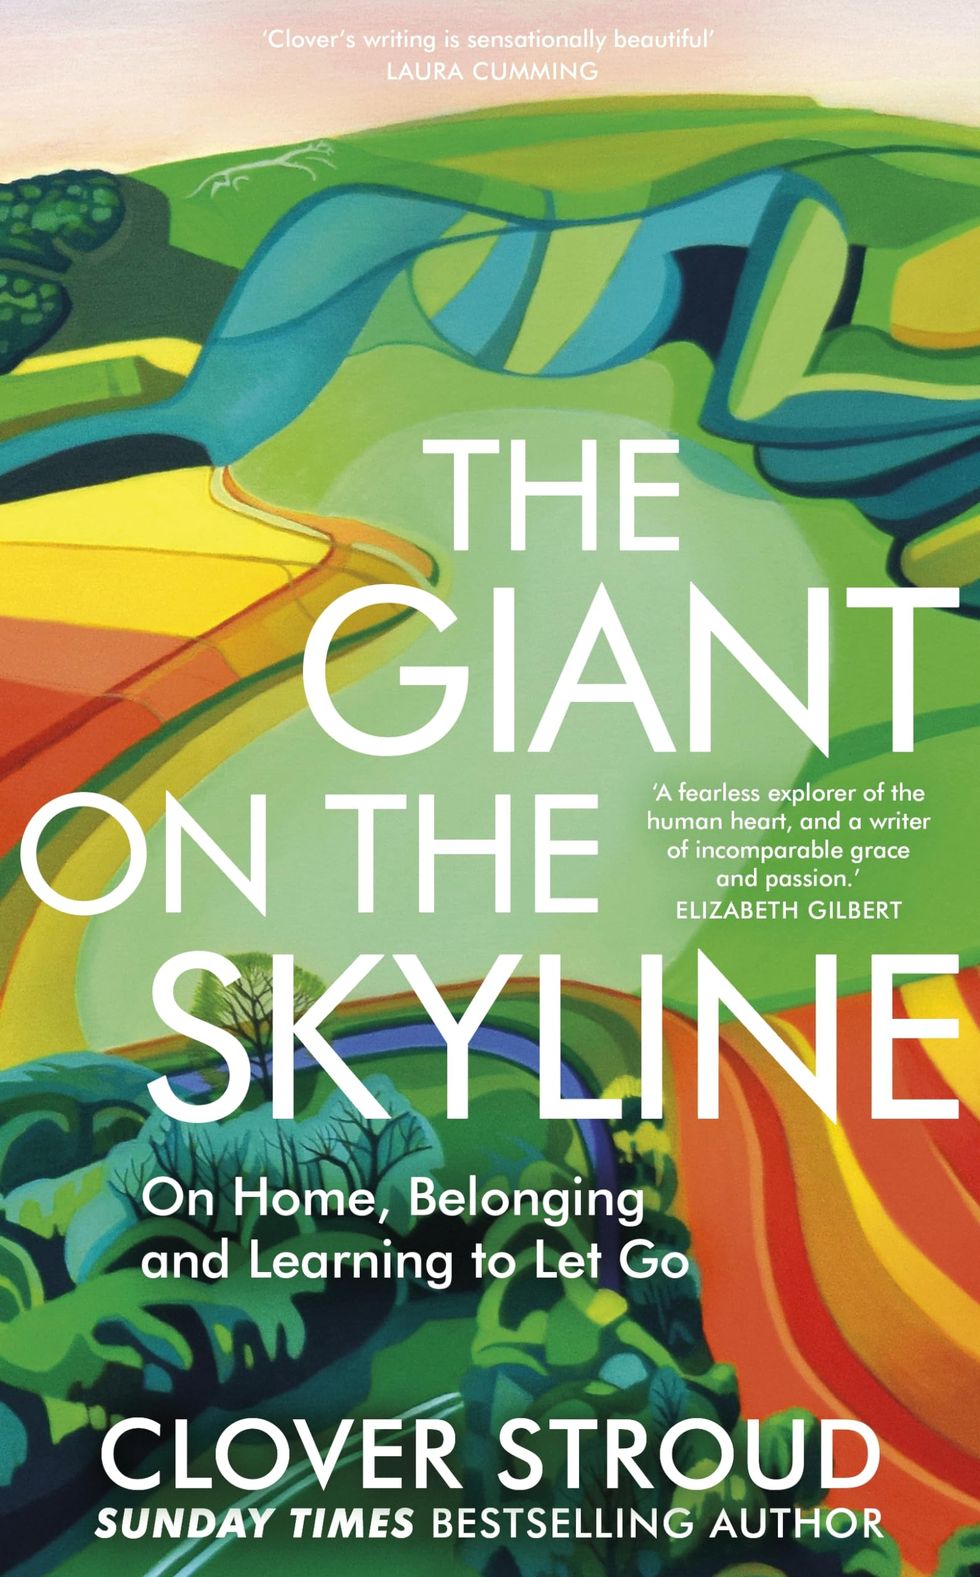 The Giant on the Skyline: A stunning memoir about the meaning of home from the Sunday Times bestselling author